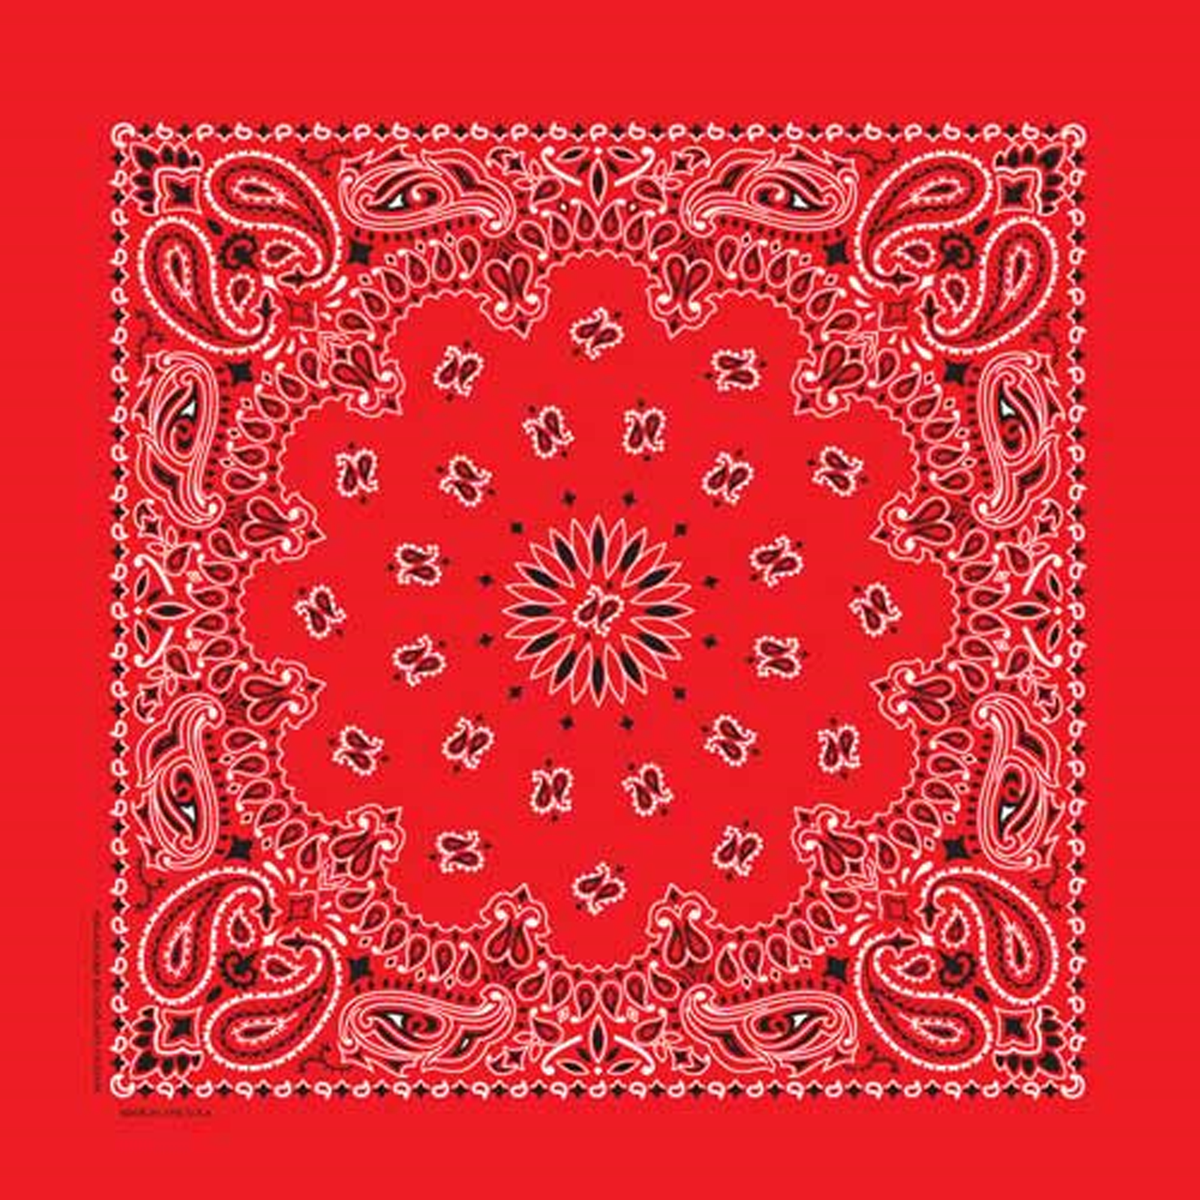 Paisley Western Cotton Bandana in Red - Rockmount